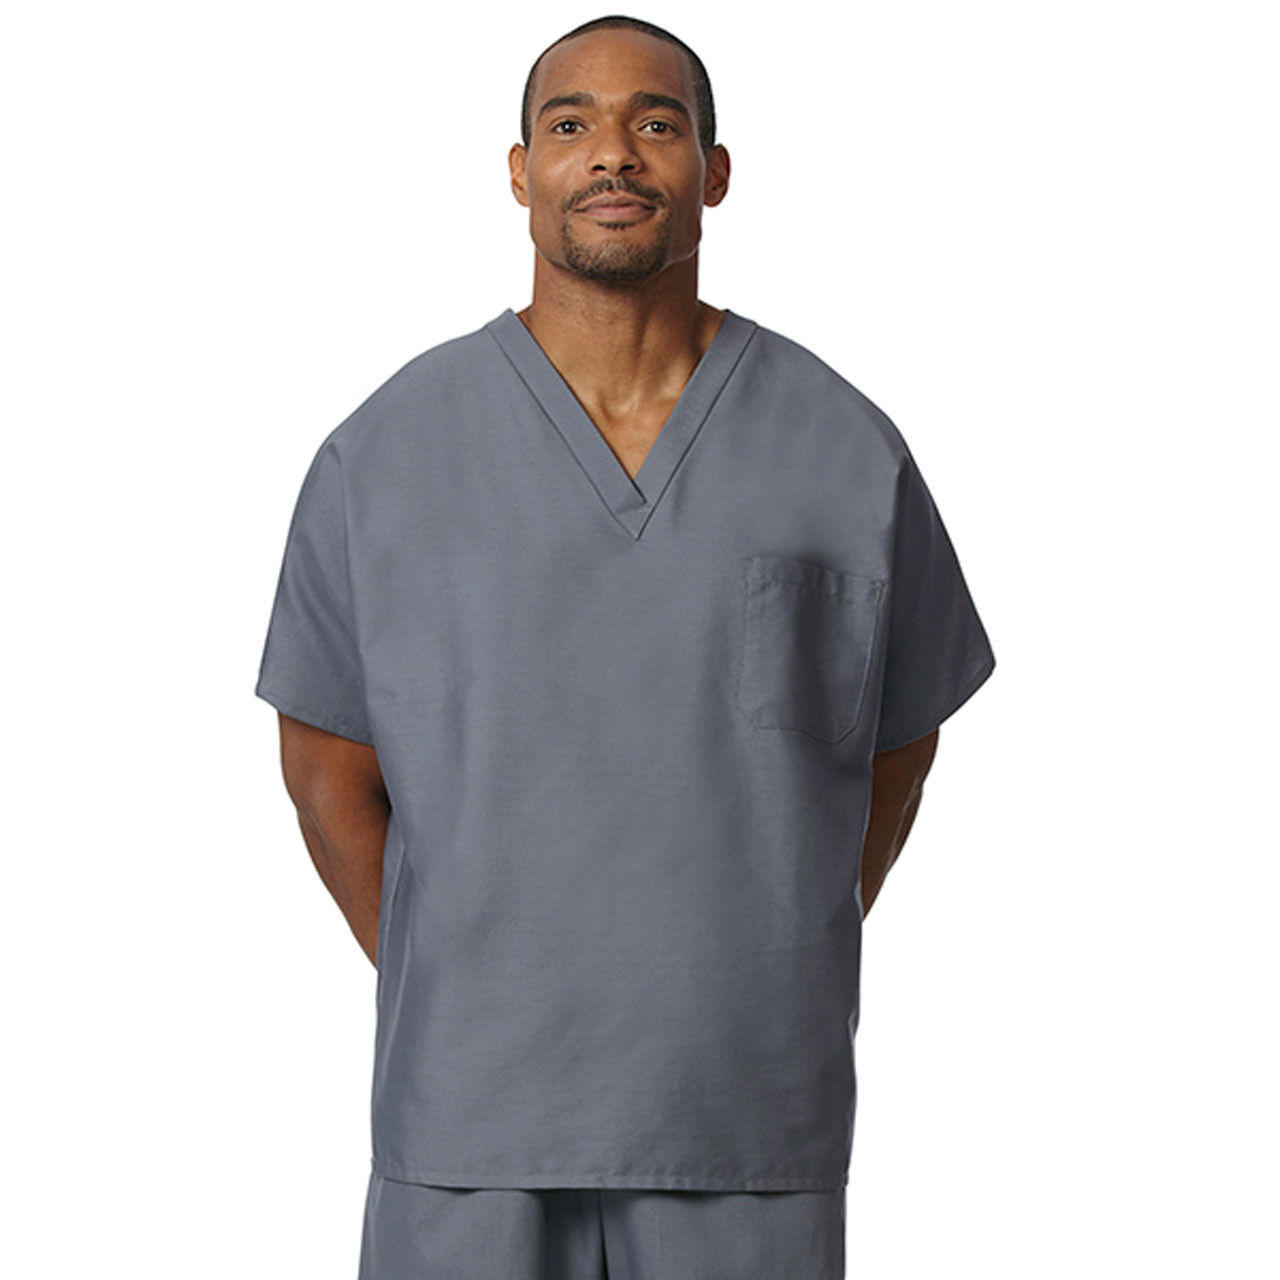 Are the Womens and Mens Tall Scrub Tops available in smaller packs?